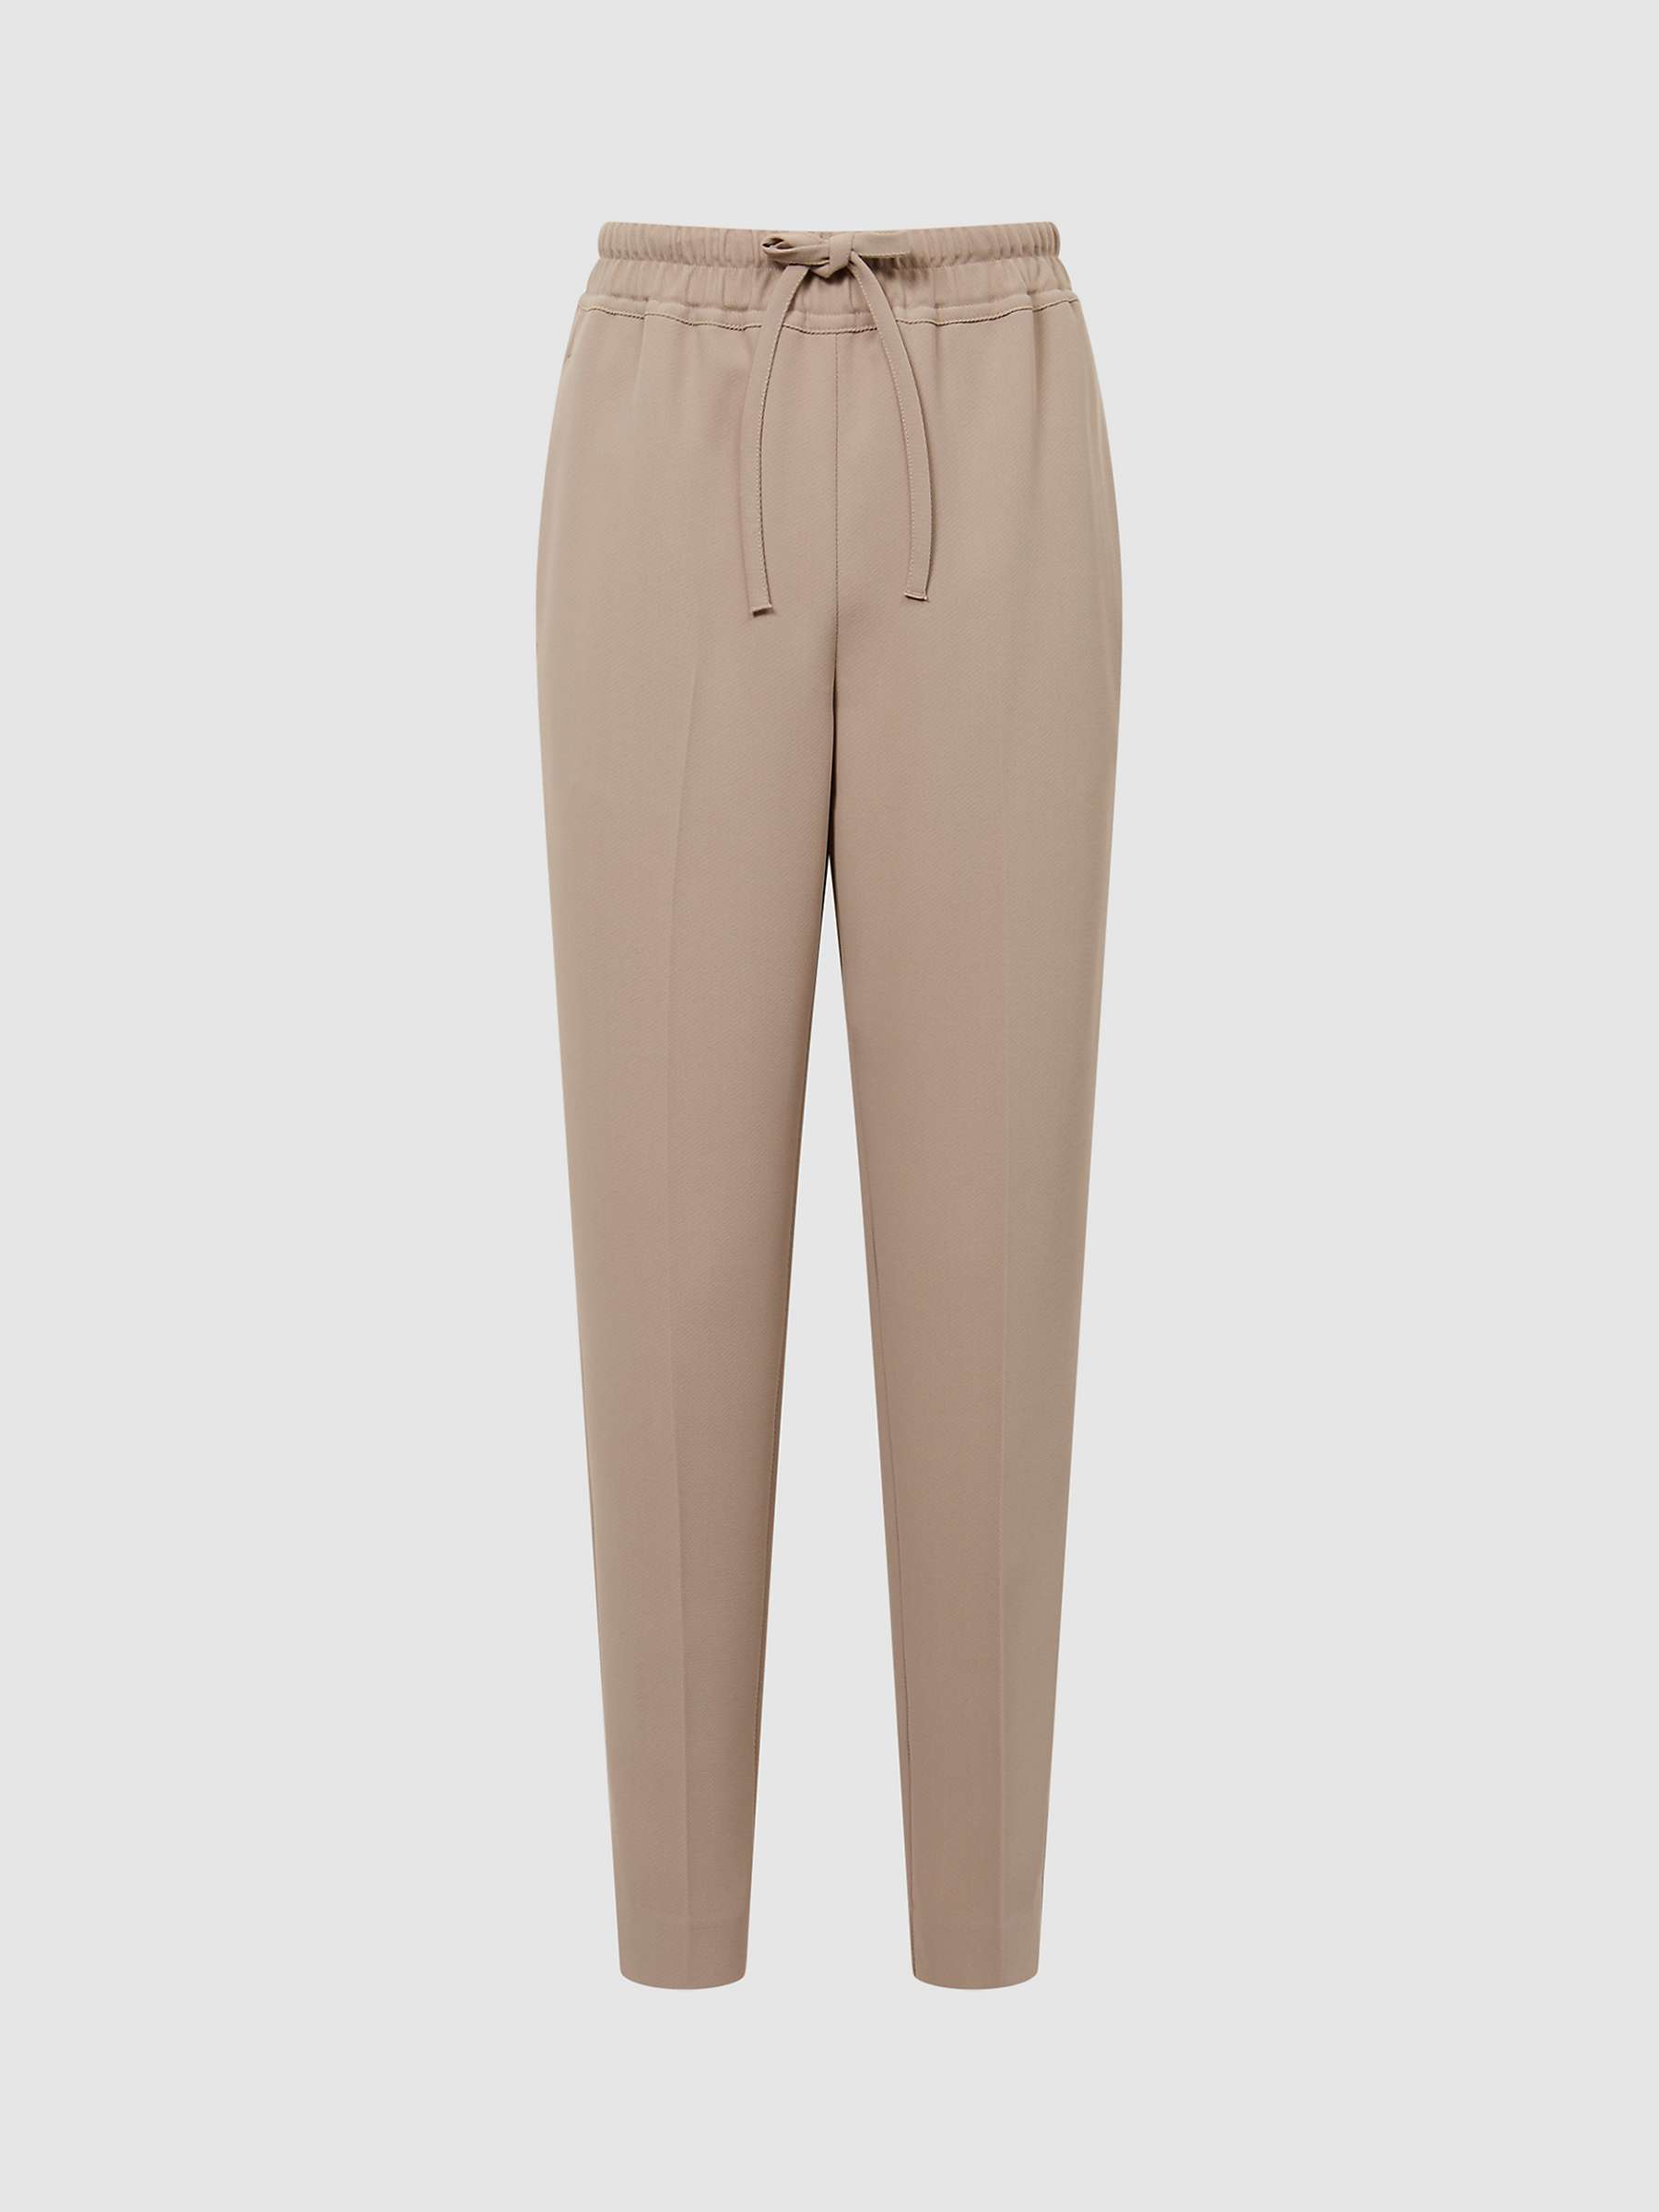 Buy Reiss Petite Hailey Tapered Trousers, Mink Online at johnlewis.com